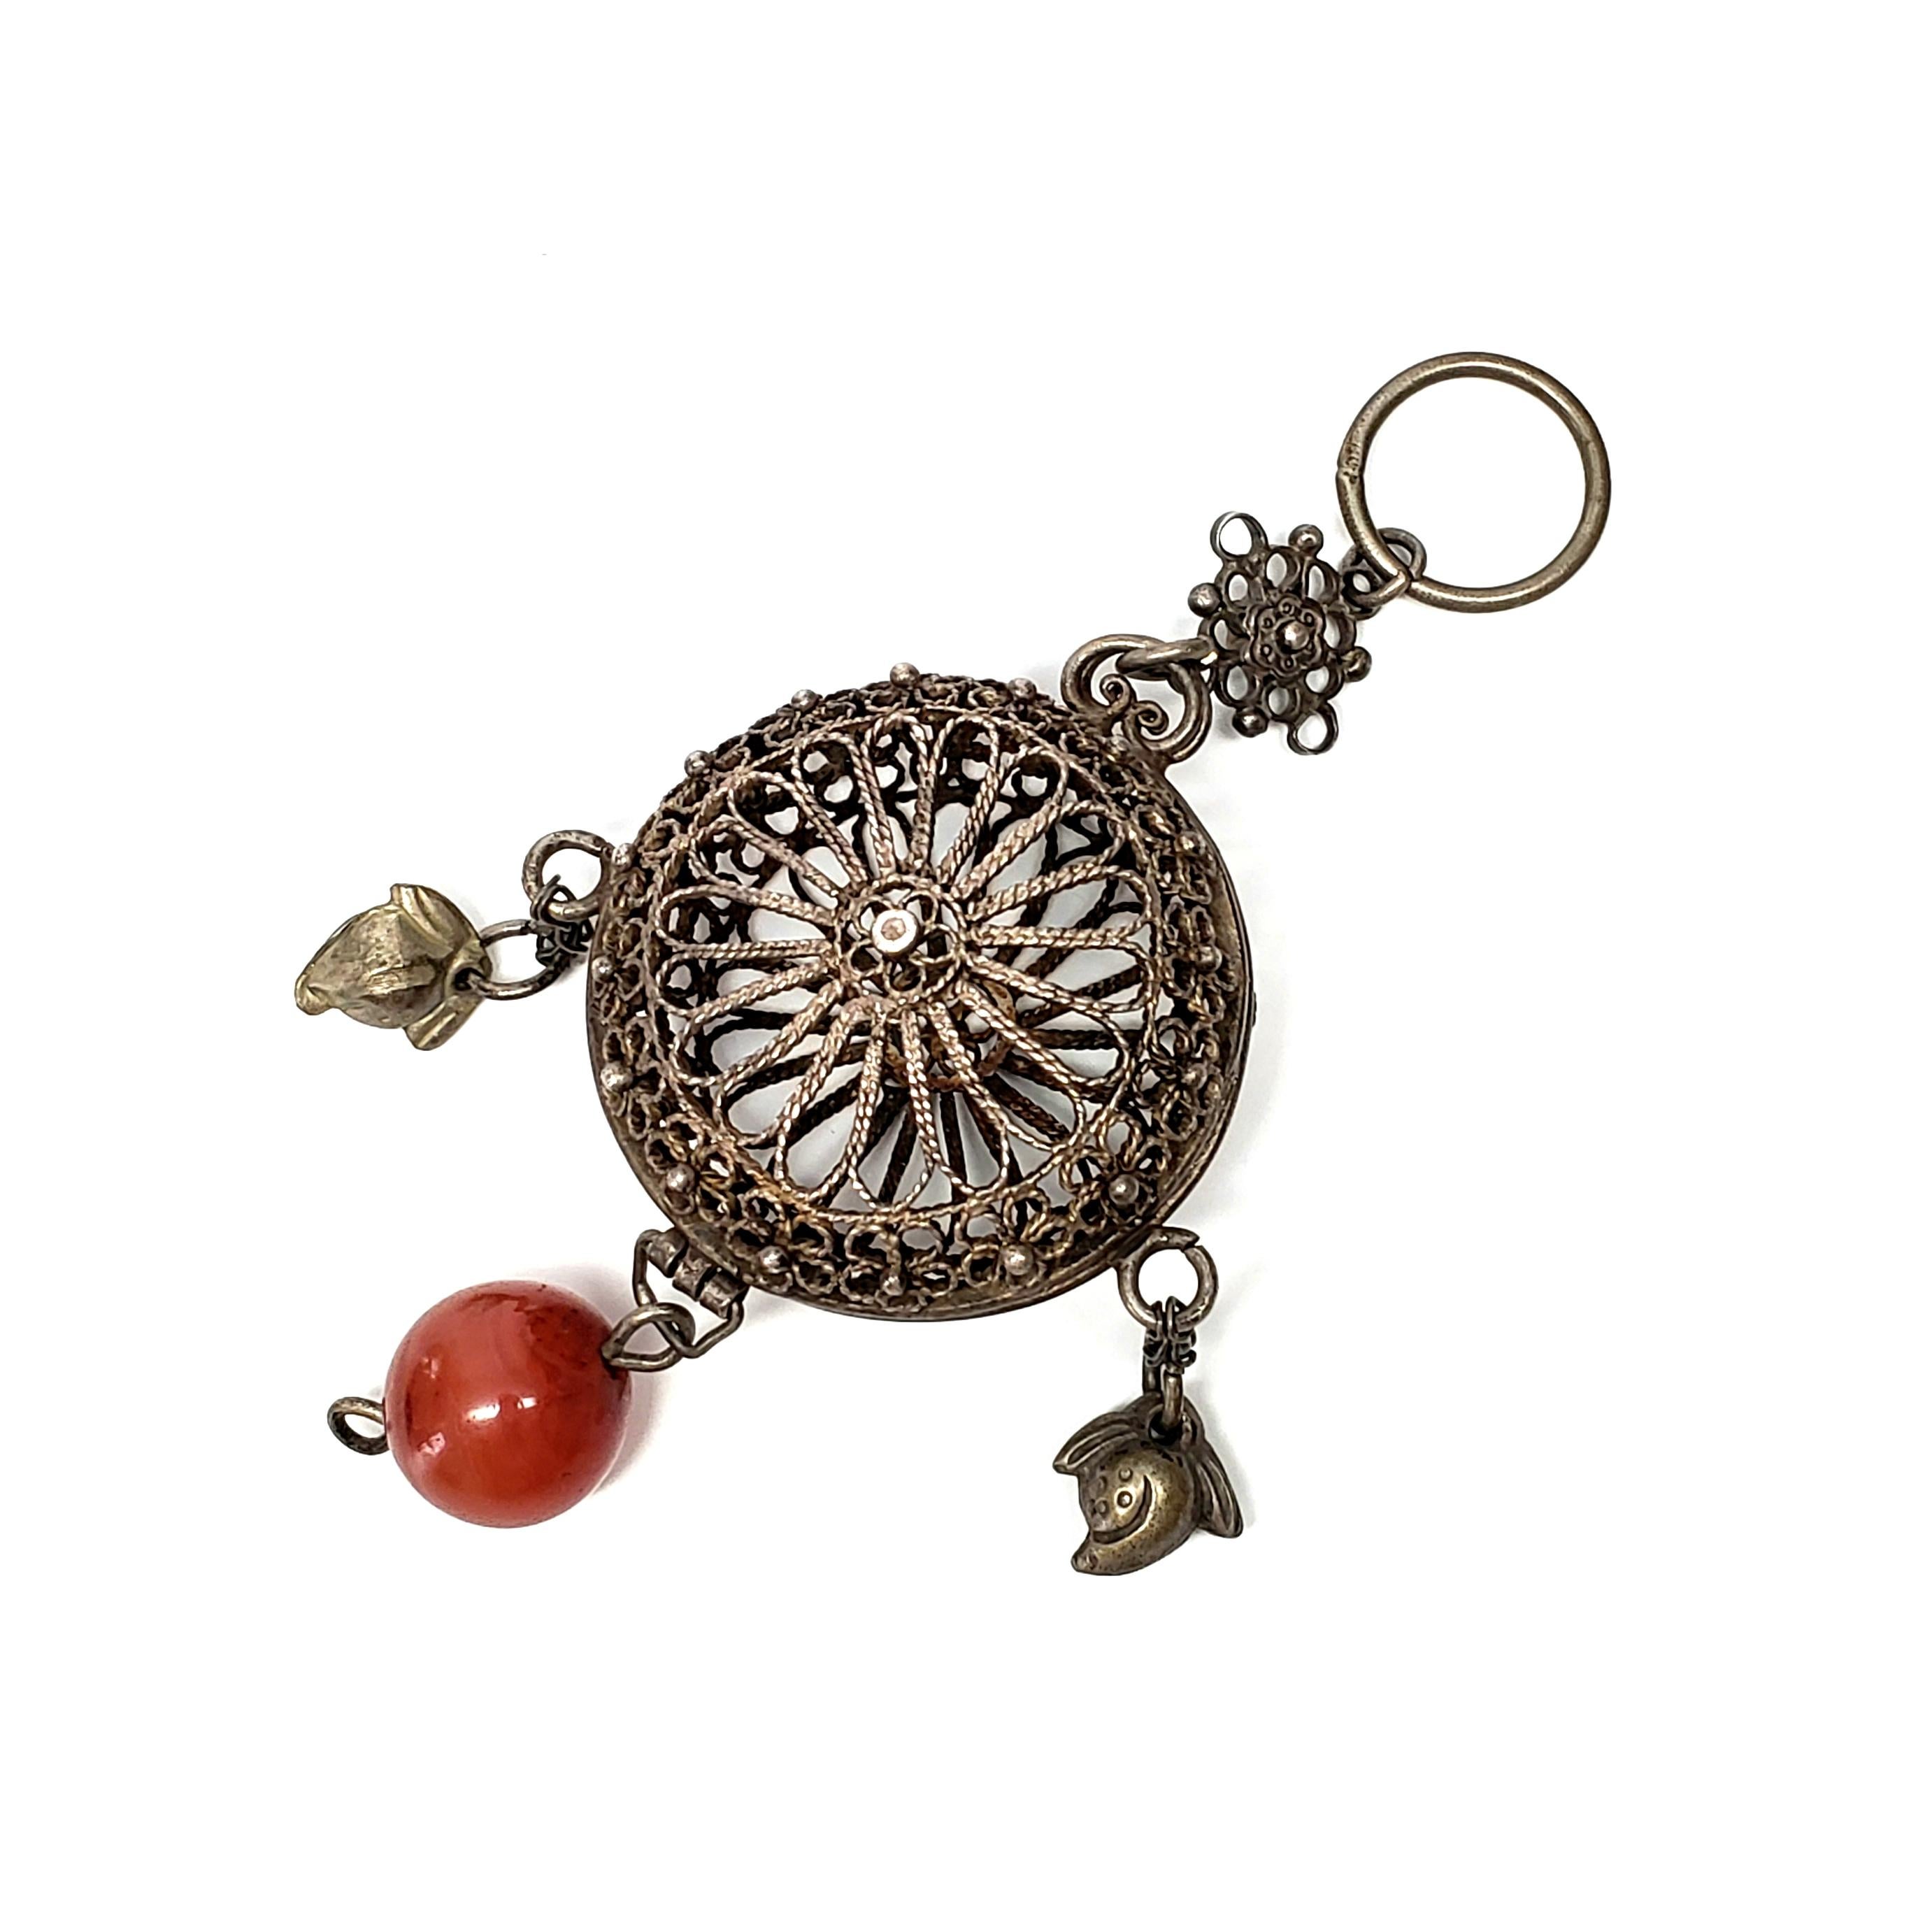 Antique Chinese silver chatelaine cricket cage vinaigrette.

Beautiful filigree floral design with a large round carnelian bead and dangles. Cage opens when loop is removed.

Measures 5